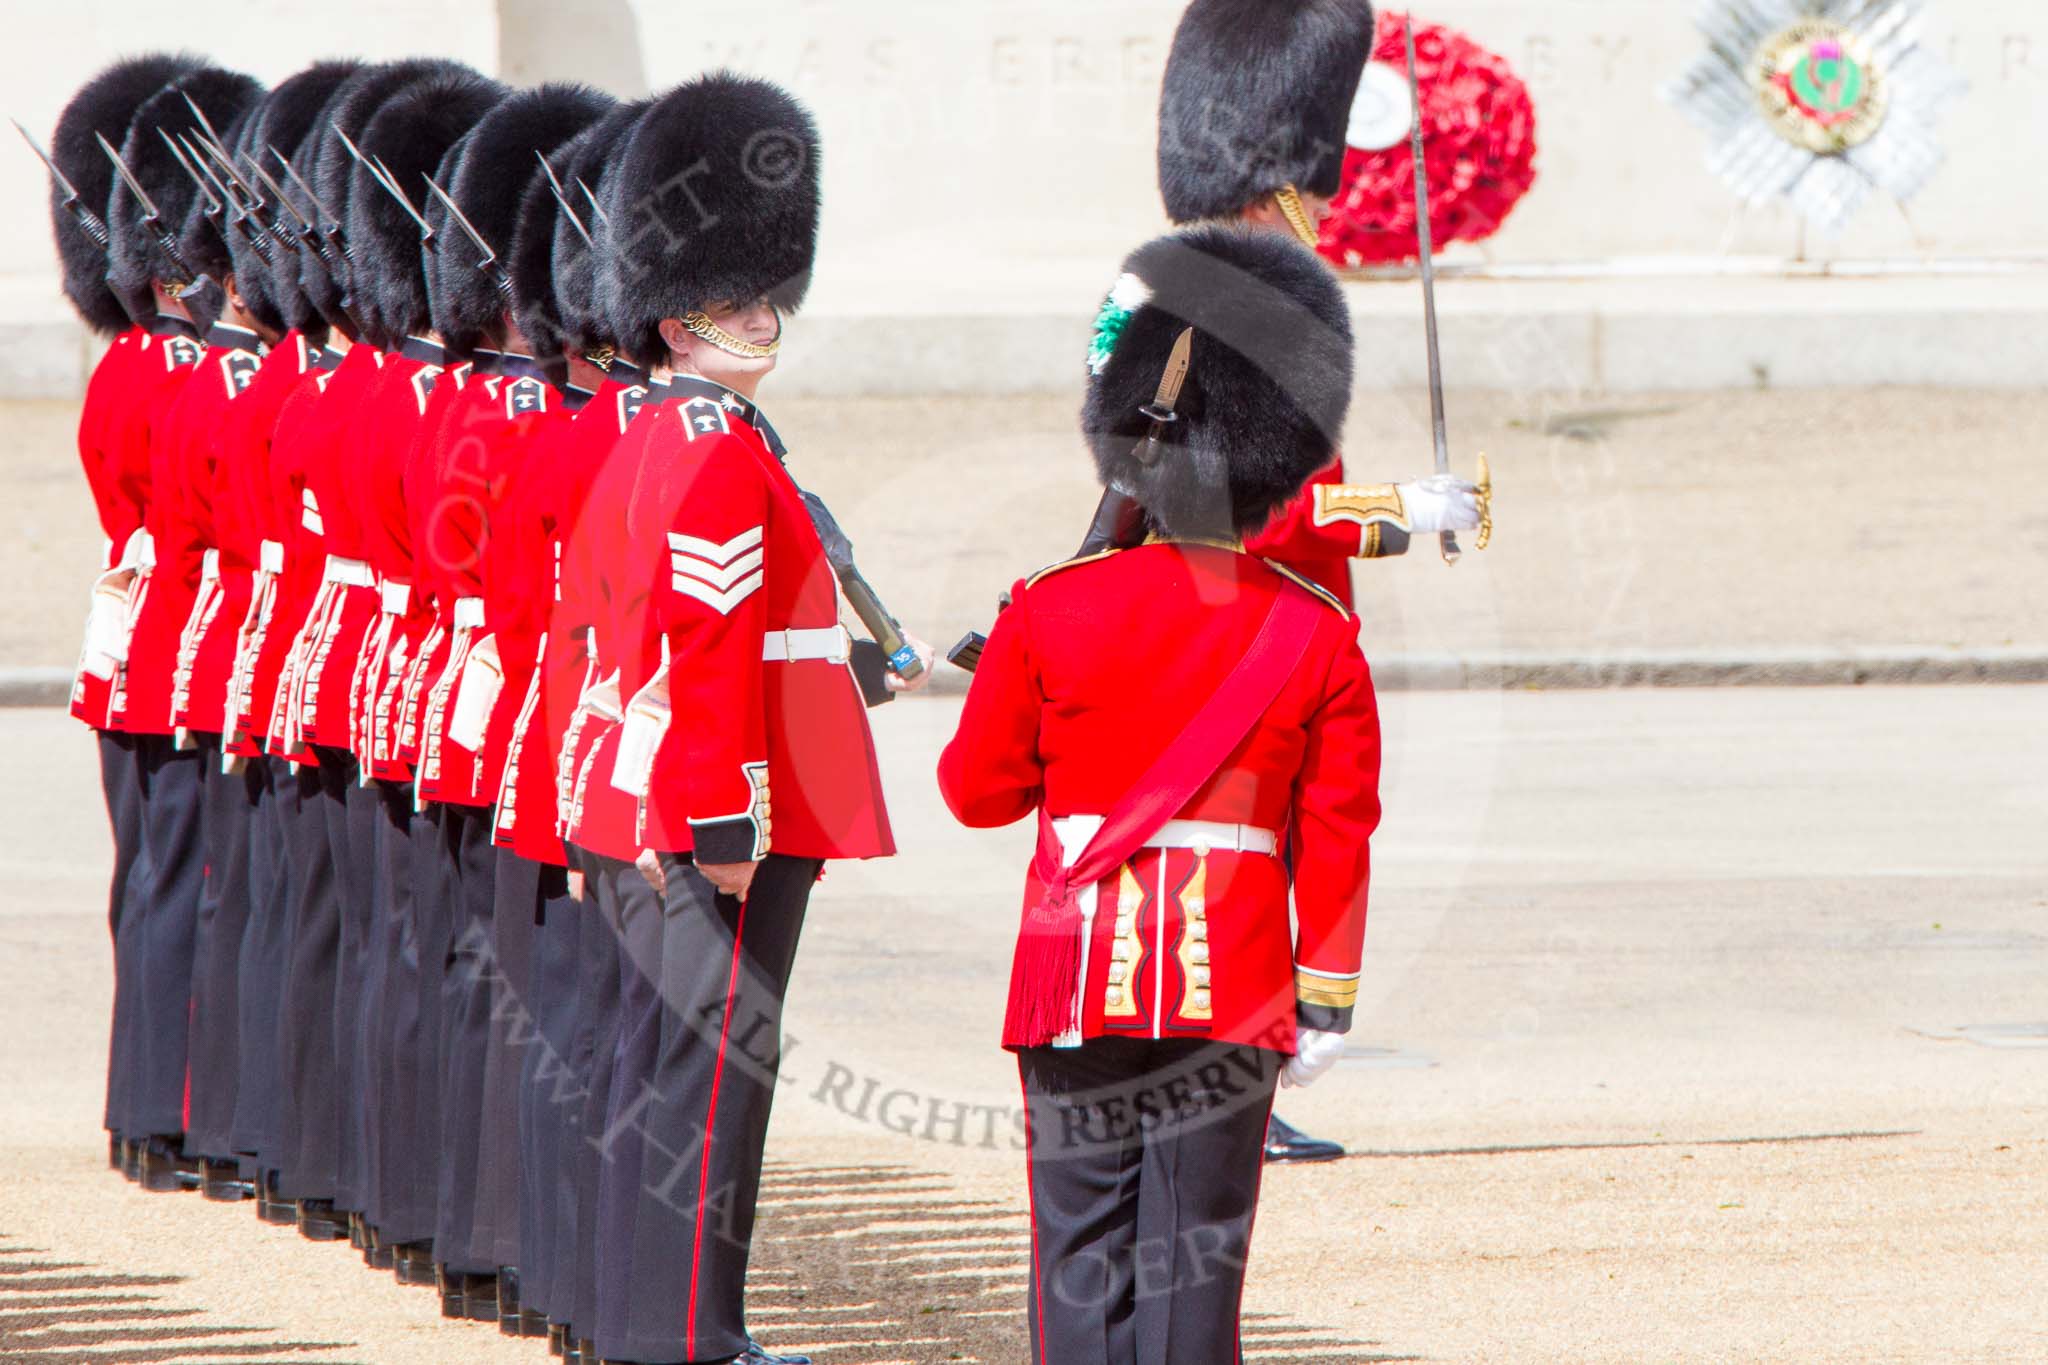 Trooping the Colour 2013: No. 3 Guard, 1st Battalion Welsh Guards, at the gap in the line for members of the Royal Family. Image #174, 15 June 2013 10:44 Horse Guards Parade, London, UK